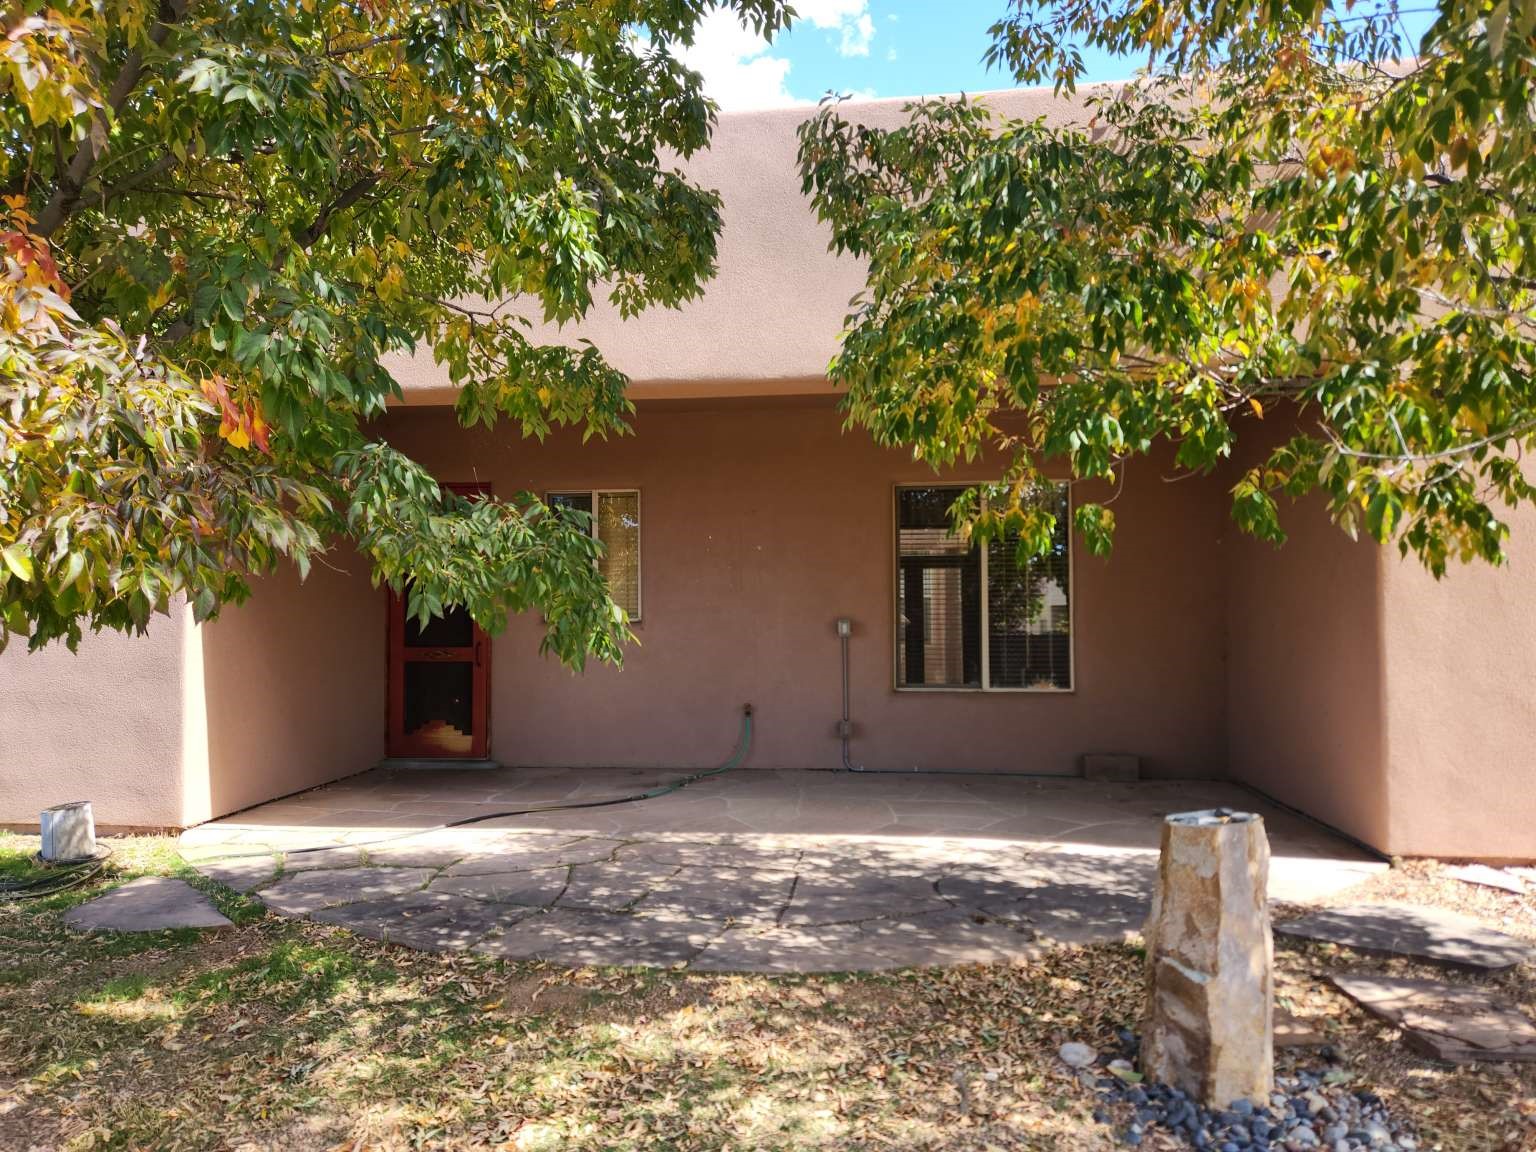 12 Madre Mountain, Santa Fe, New Mexico 87508, 3 Bedrooms Bedrooms, ,3 BathroomsBathrooms,Residential,For Sale,12 Madre Mountain,202341202